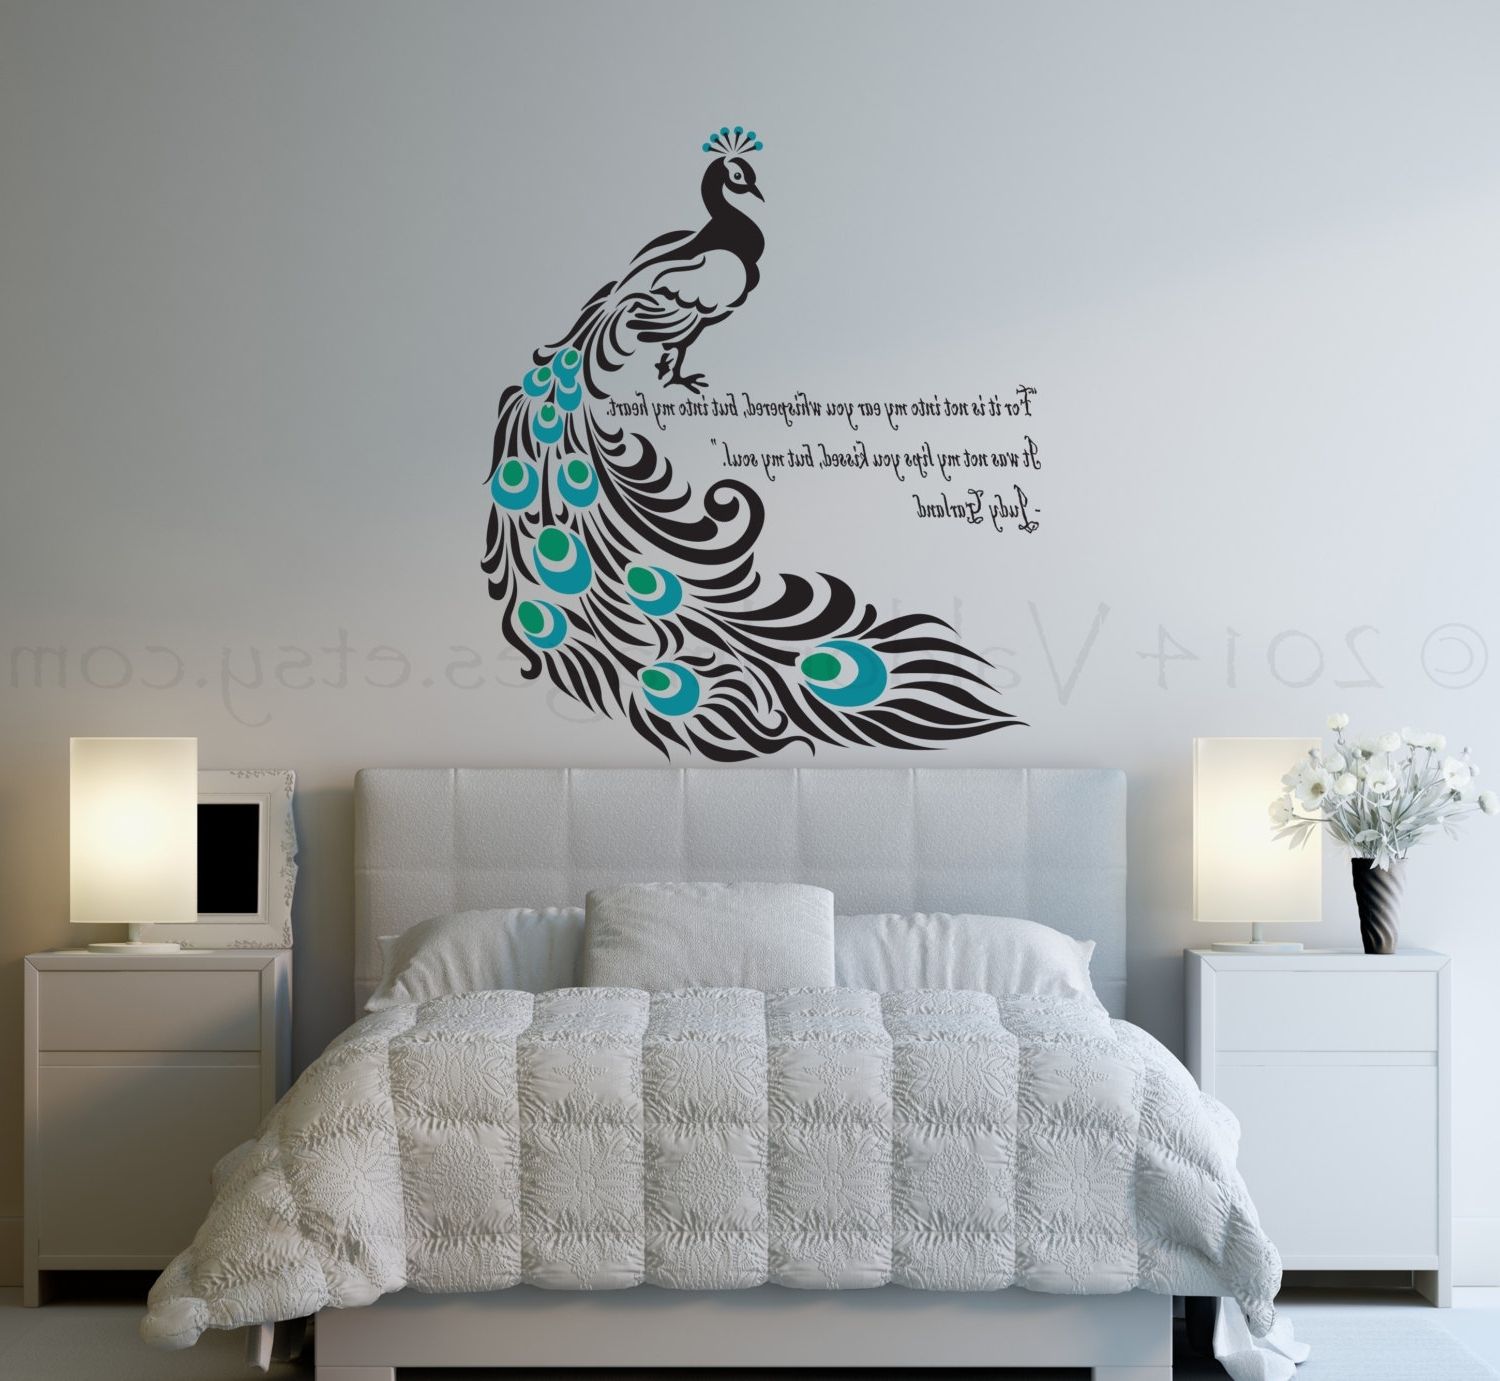 Bedroom Wall Art Stickers Fashion Hd Pics For Ideas Yodersmart For Current Bedroom Wall Art (View 1 of 15)